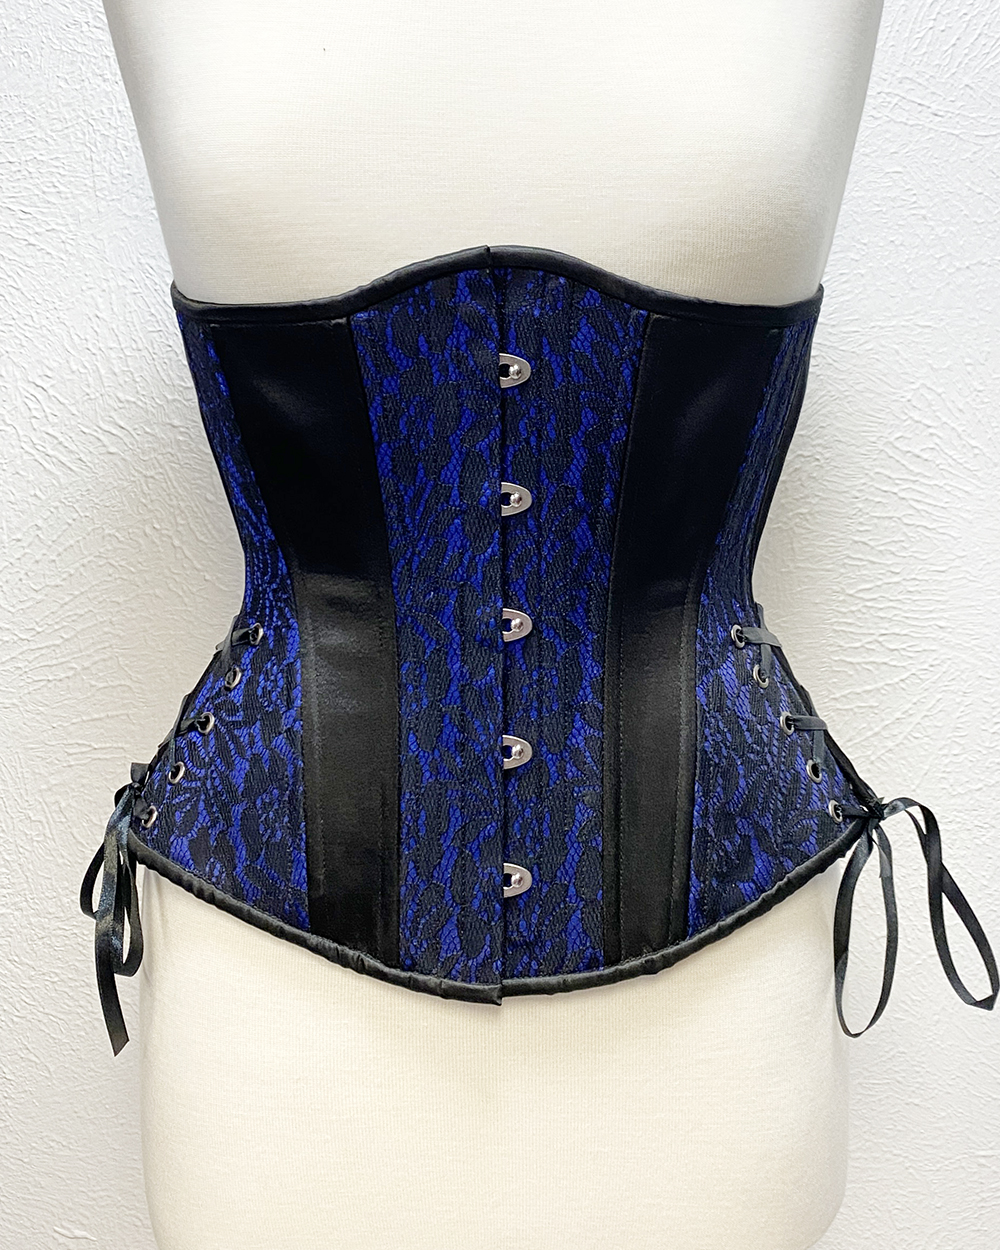 Blue with Black Lace Overlay Underbust Corset – Faire Treasures